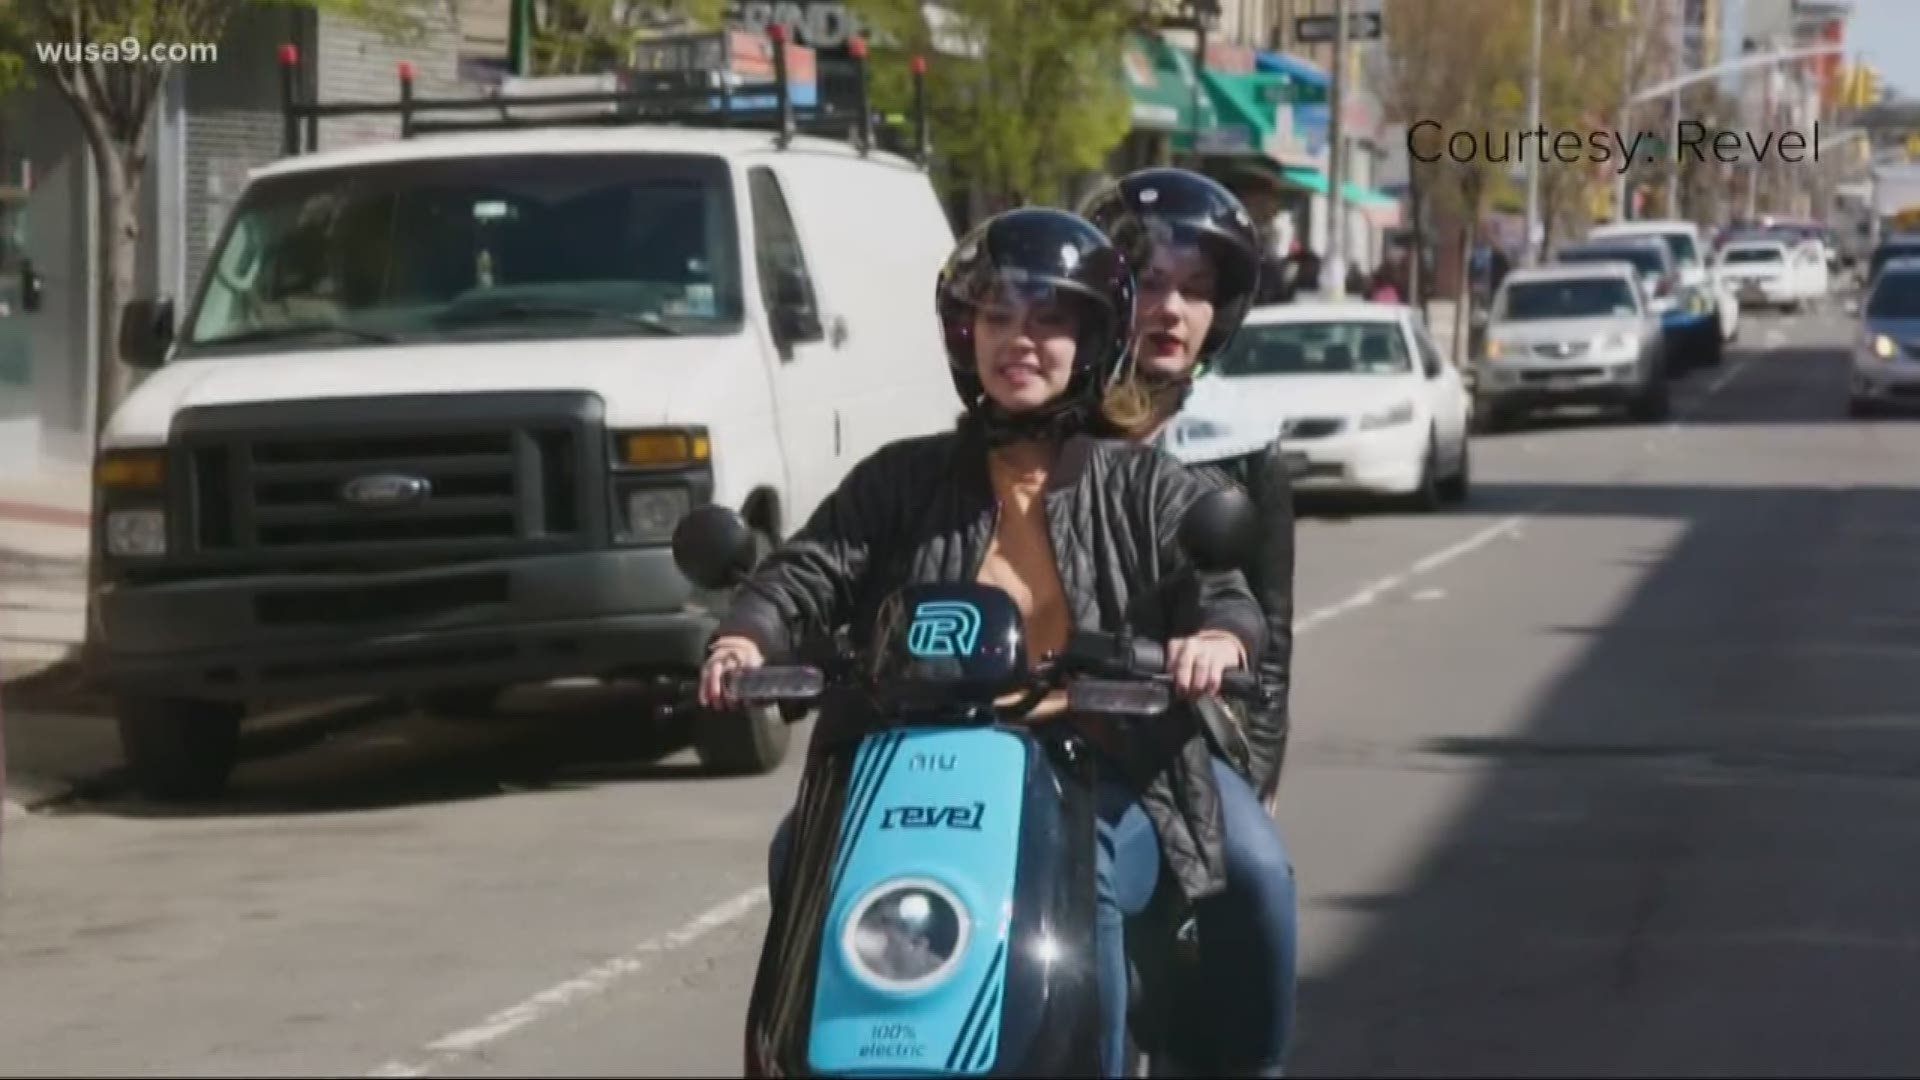 Starting this weekend, you can hop on a moped to get around town with the click of a button.

NYC-based company, Revel, is part of a pilot program in DC that will rent out mopeds the same way you can get a dockless scooter - through an app -  but for a slightly higher startup fee.

According to the company’s website, there is a one-time $19 fee to sign up with Revel after you download the app, to verify your identity and safe driving record.